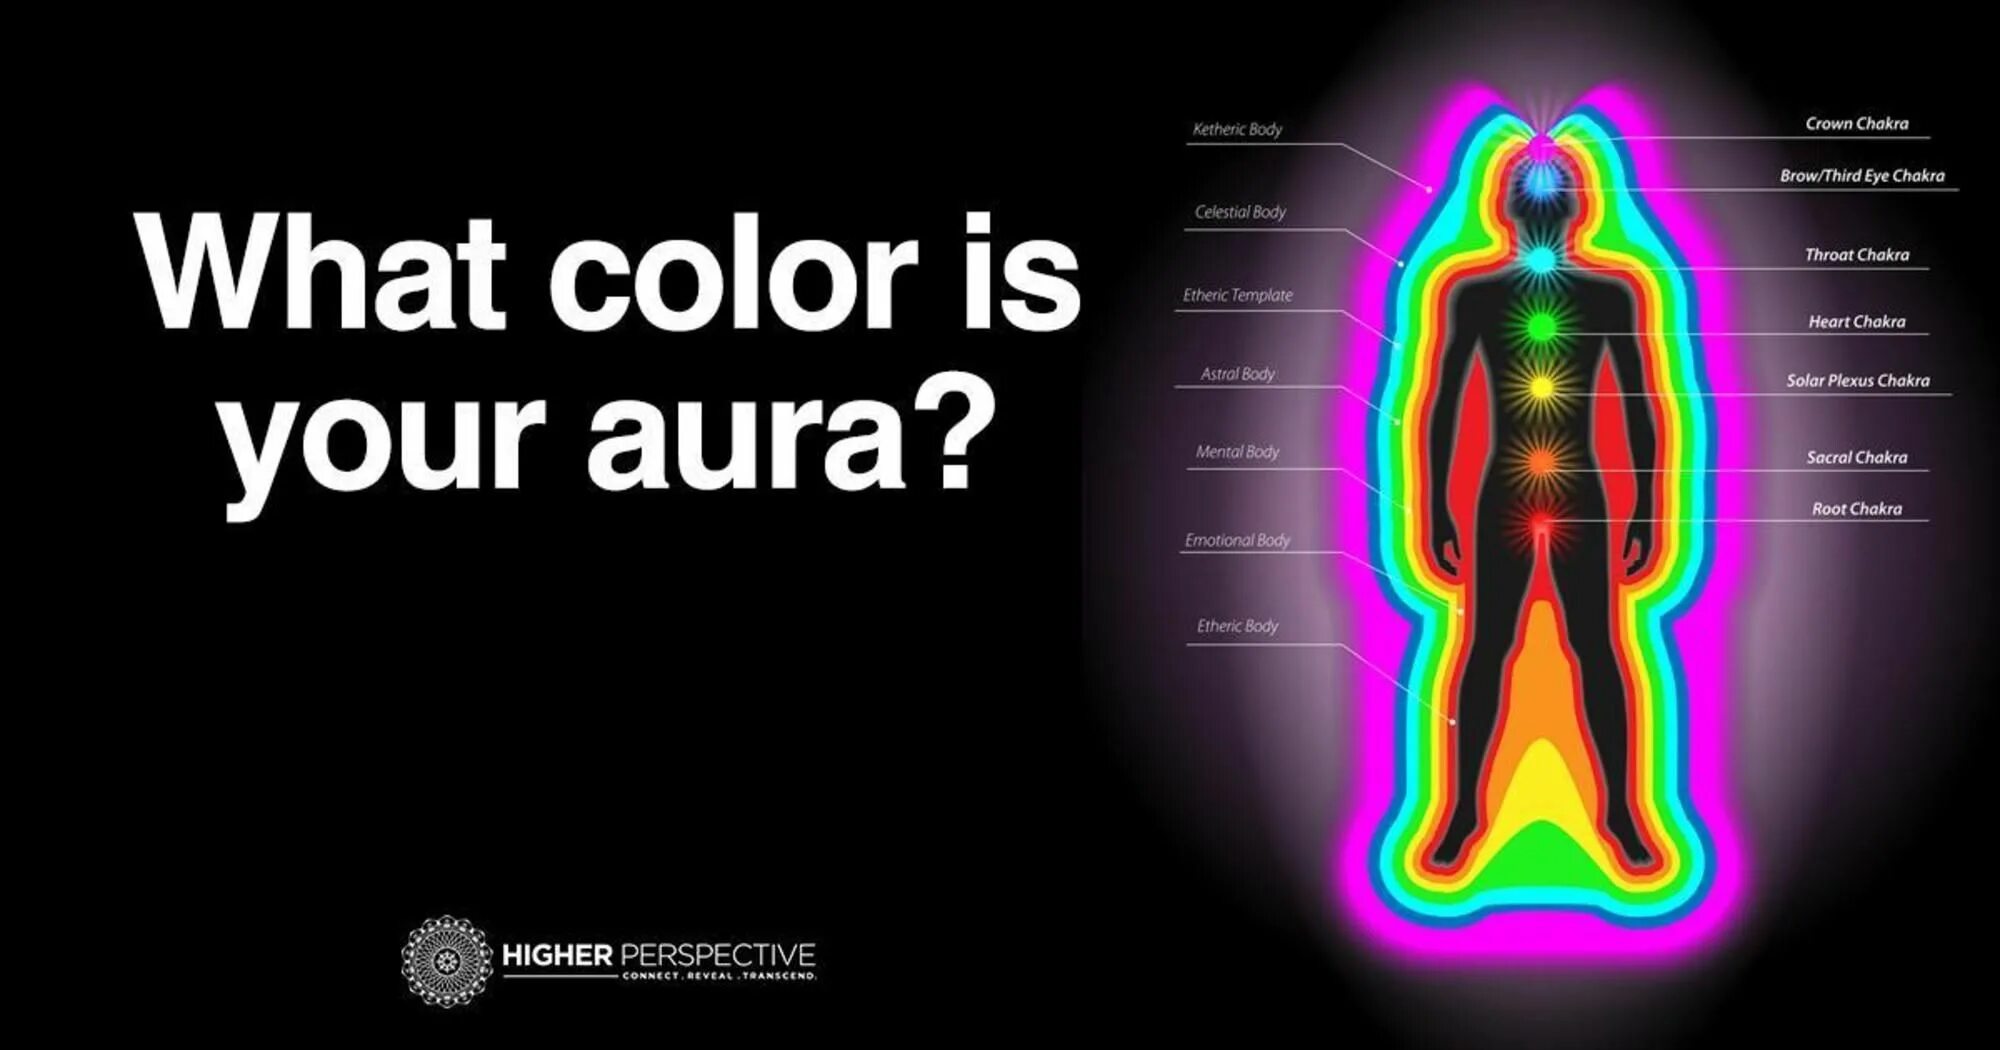 Цвет Ауры. Aura meaning. Аура perspective. What Color is your Aura?.